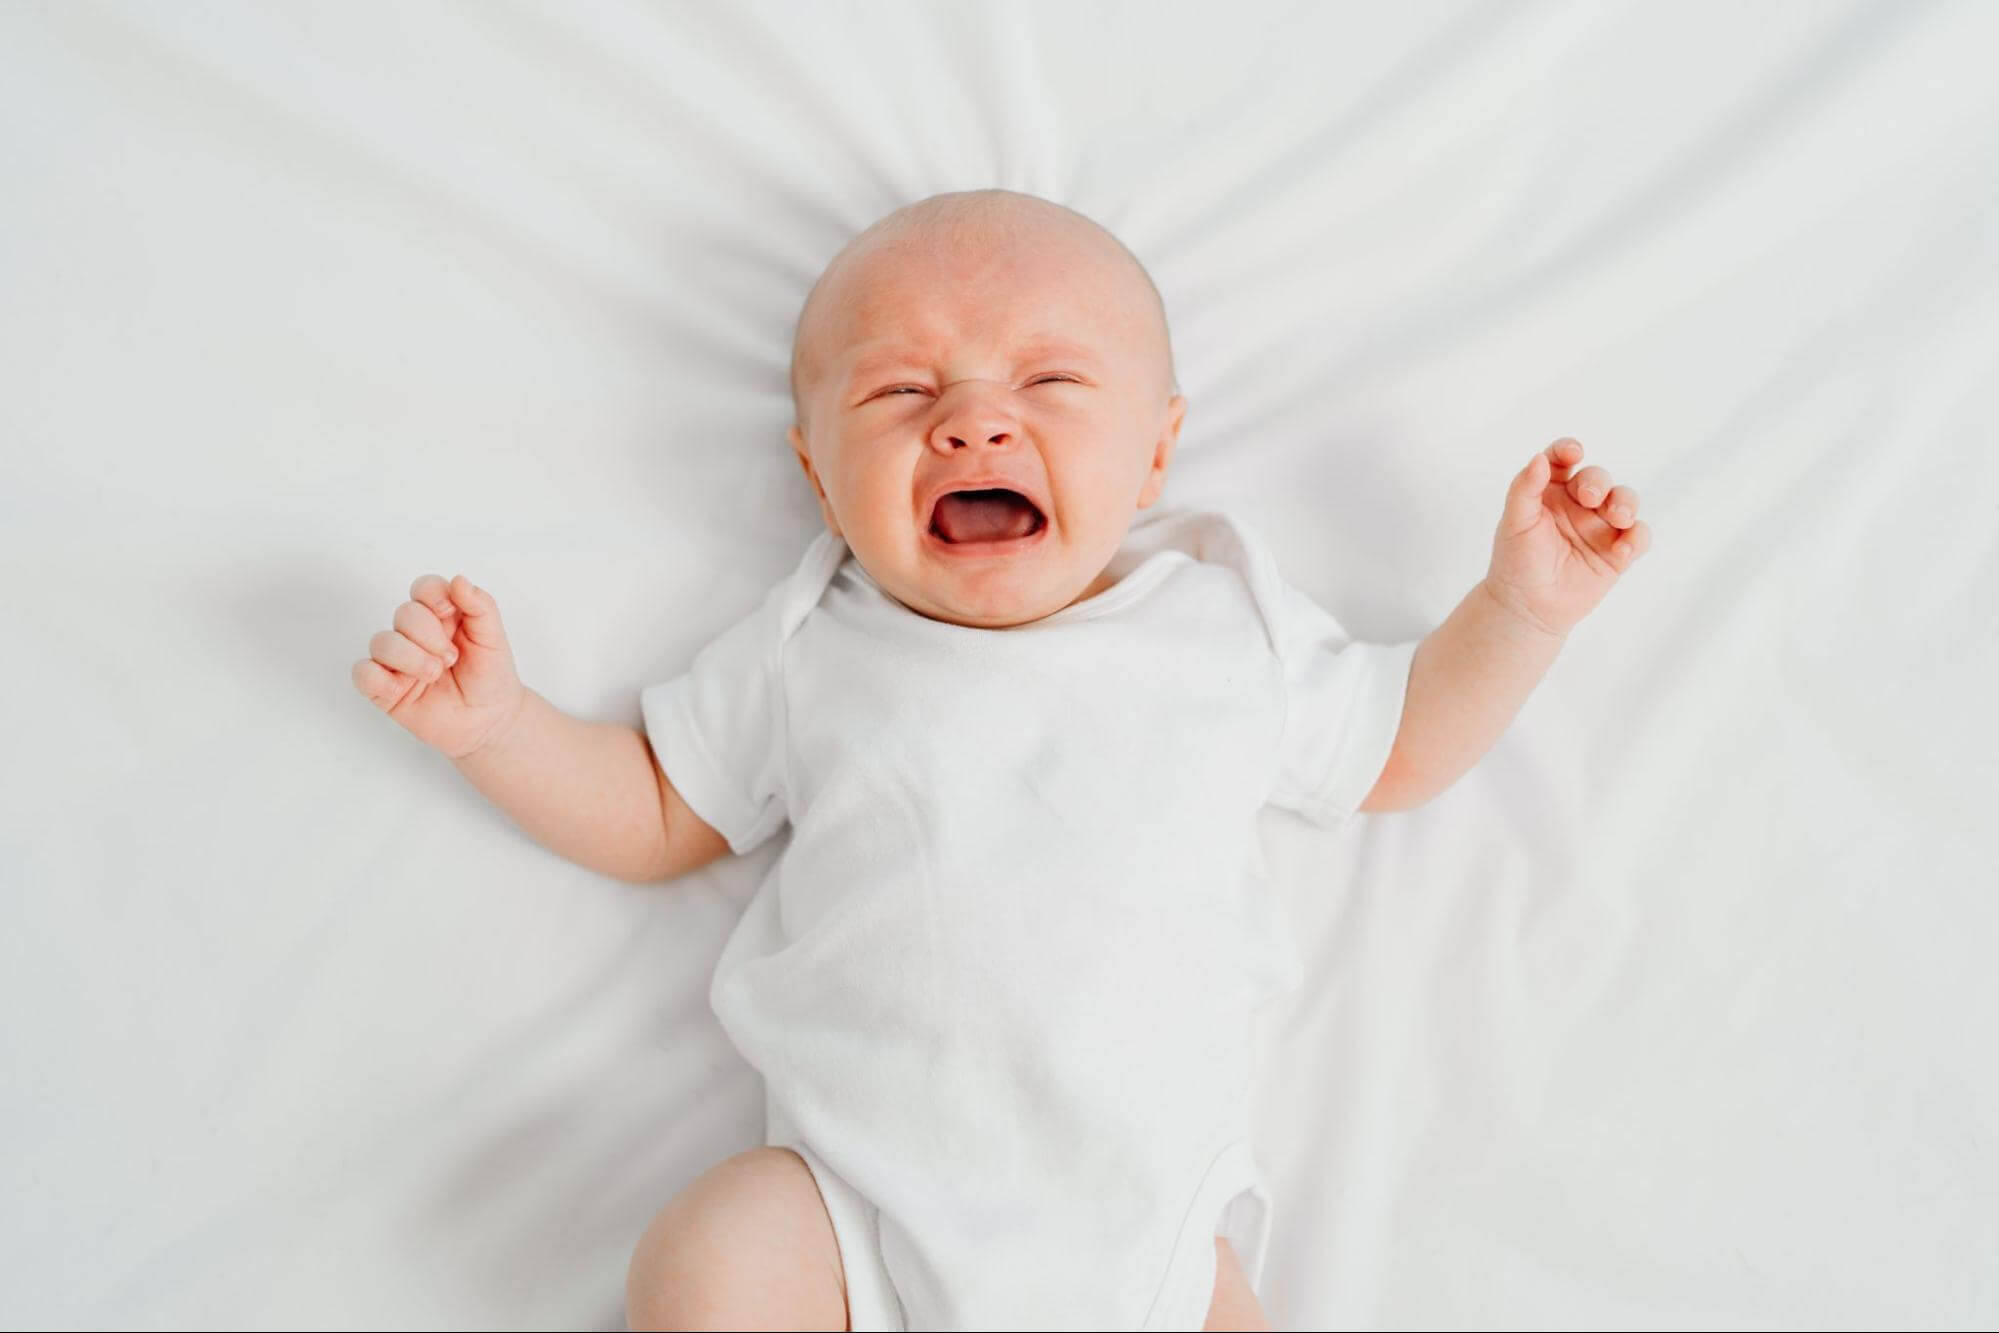 Colic in Babies - Symptoms, Causes & Treatment - Dr Golly